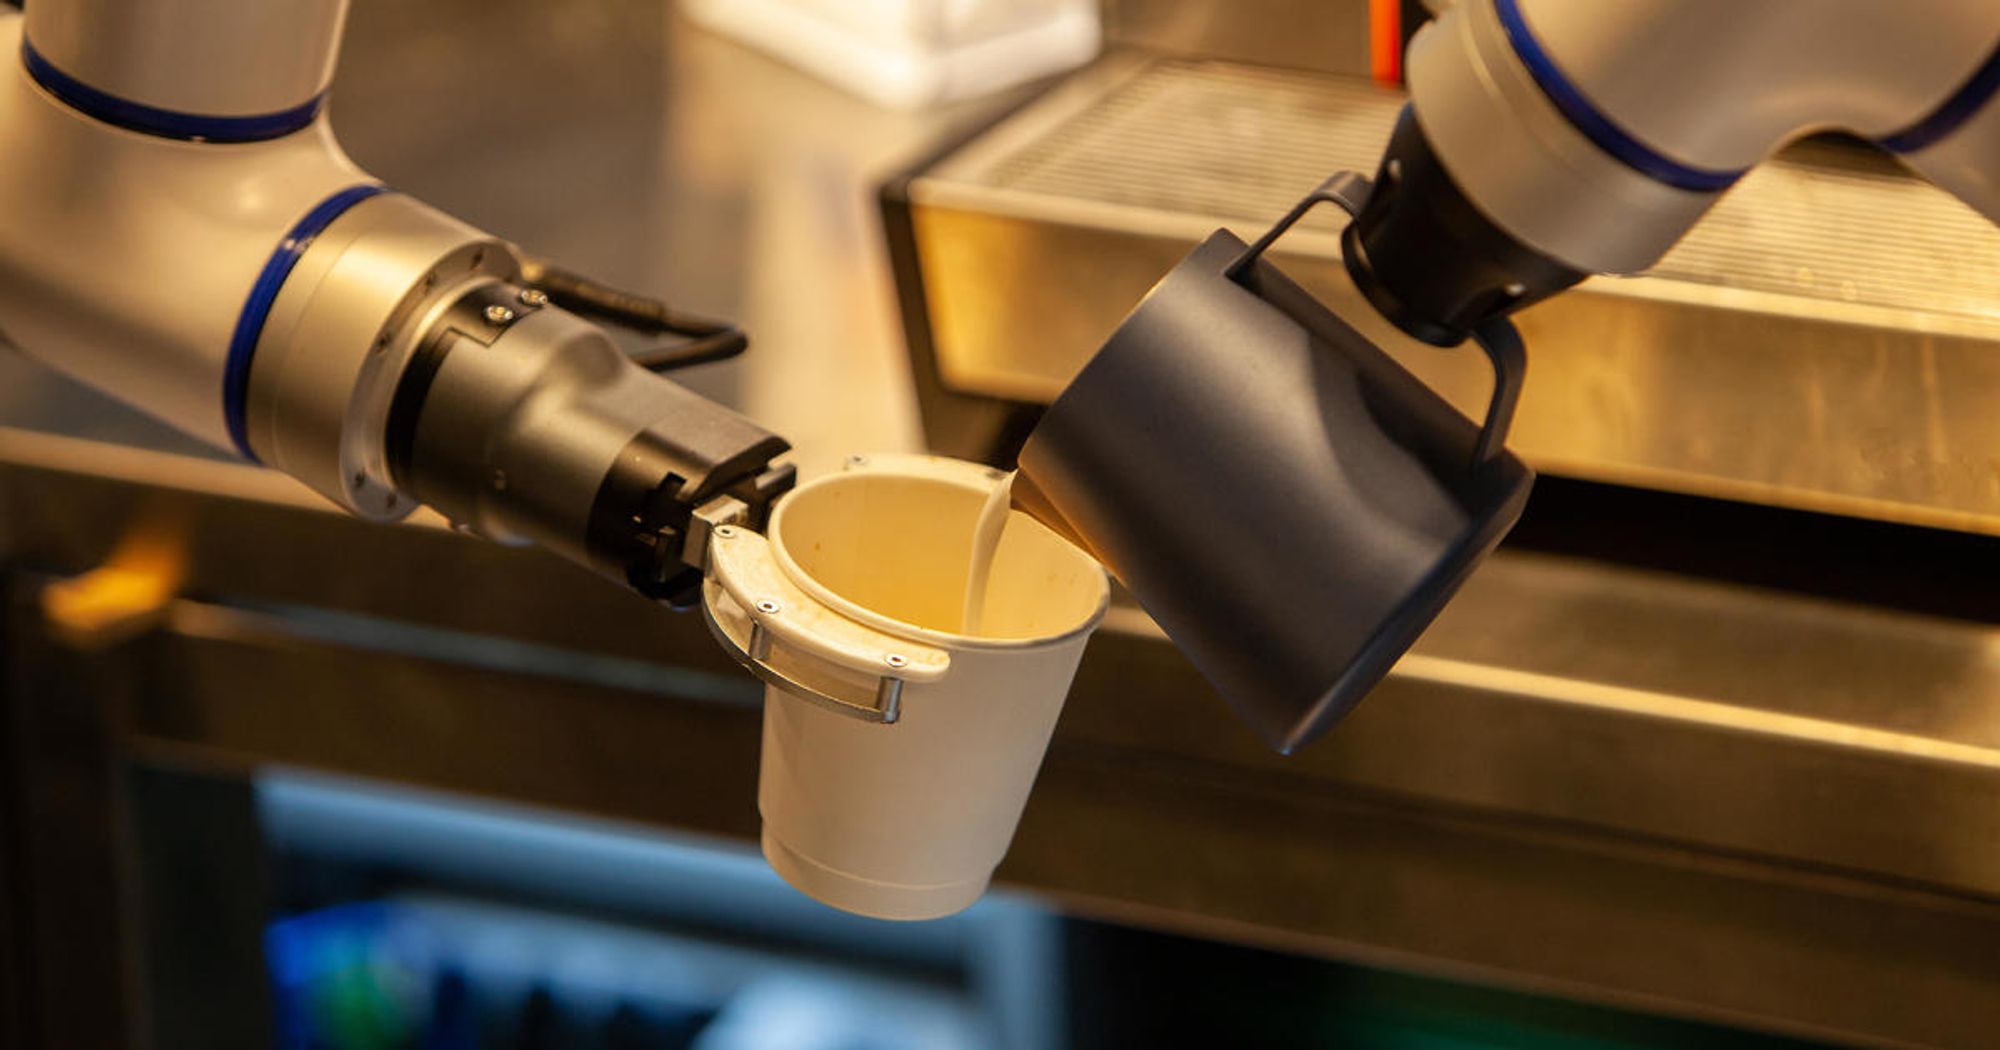 Local startup brings 'AI Barista Bots' to downtown Seattle - CW Seattle